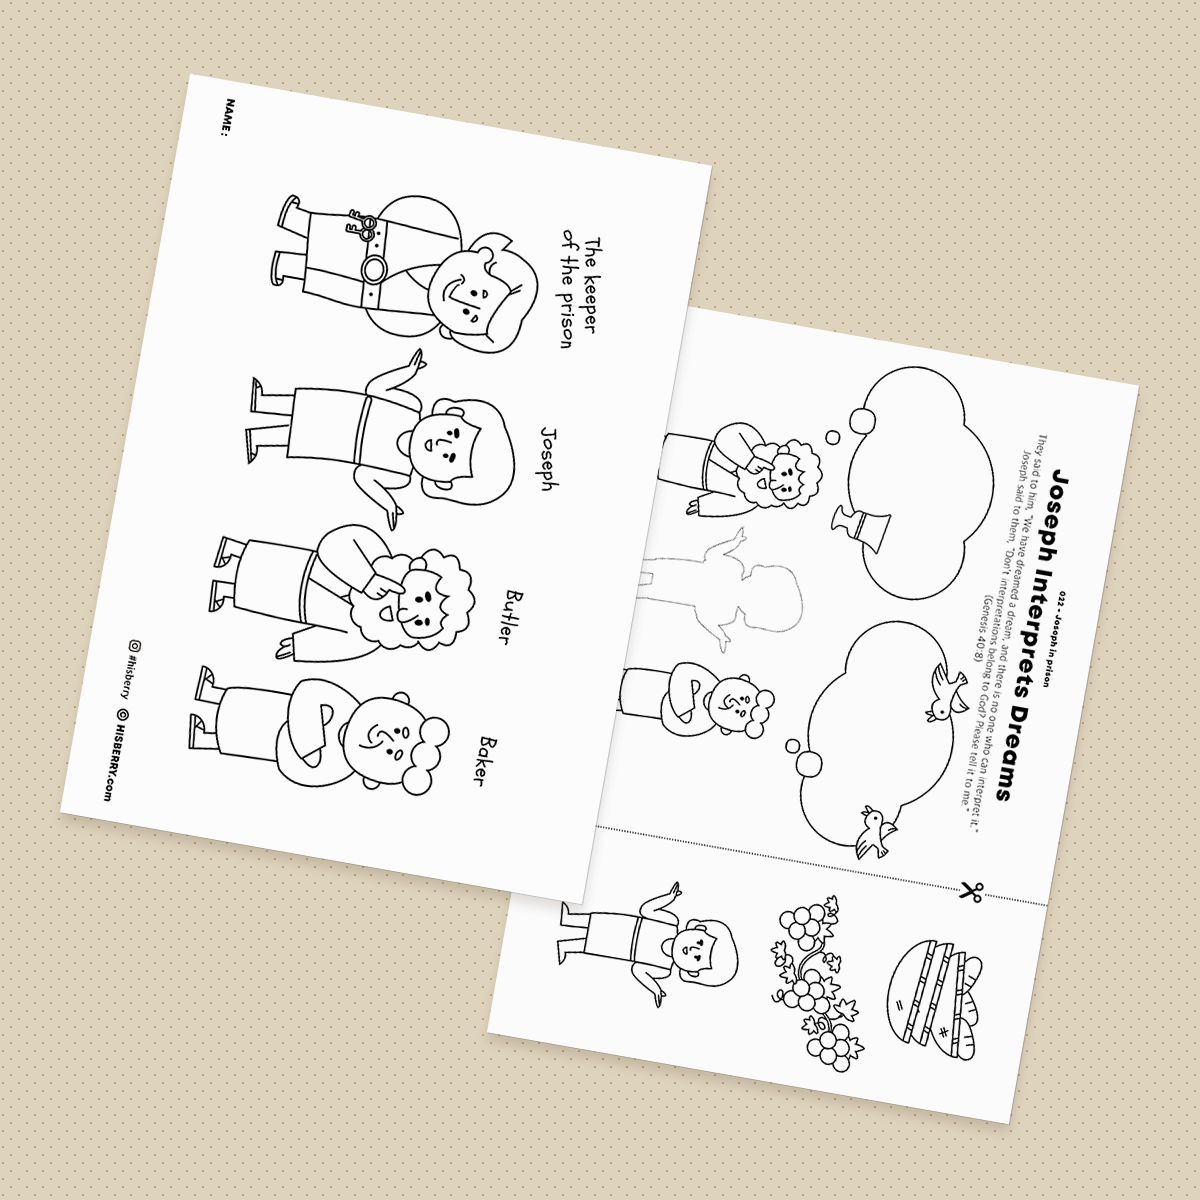 Joseph in prison - Drawing Coloring Pages Printable